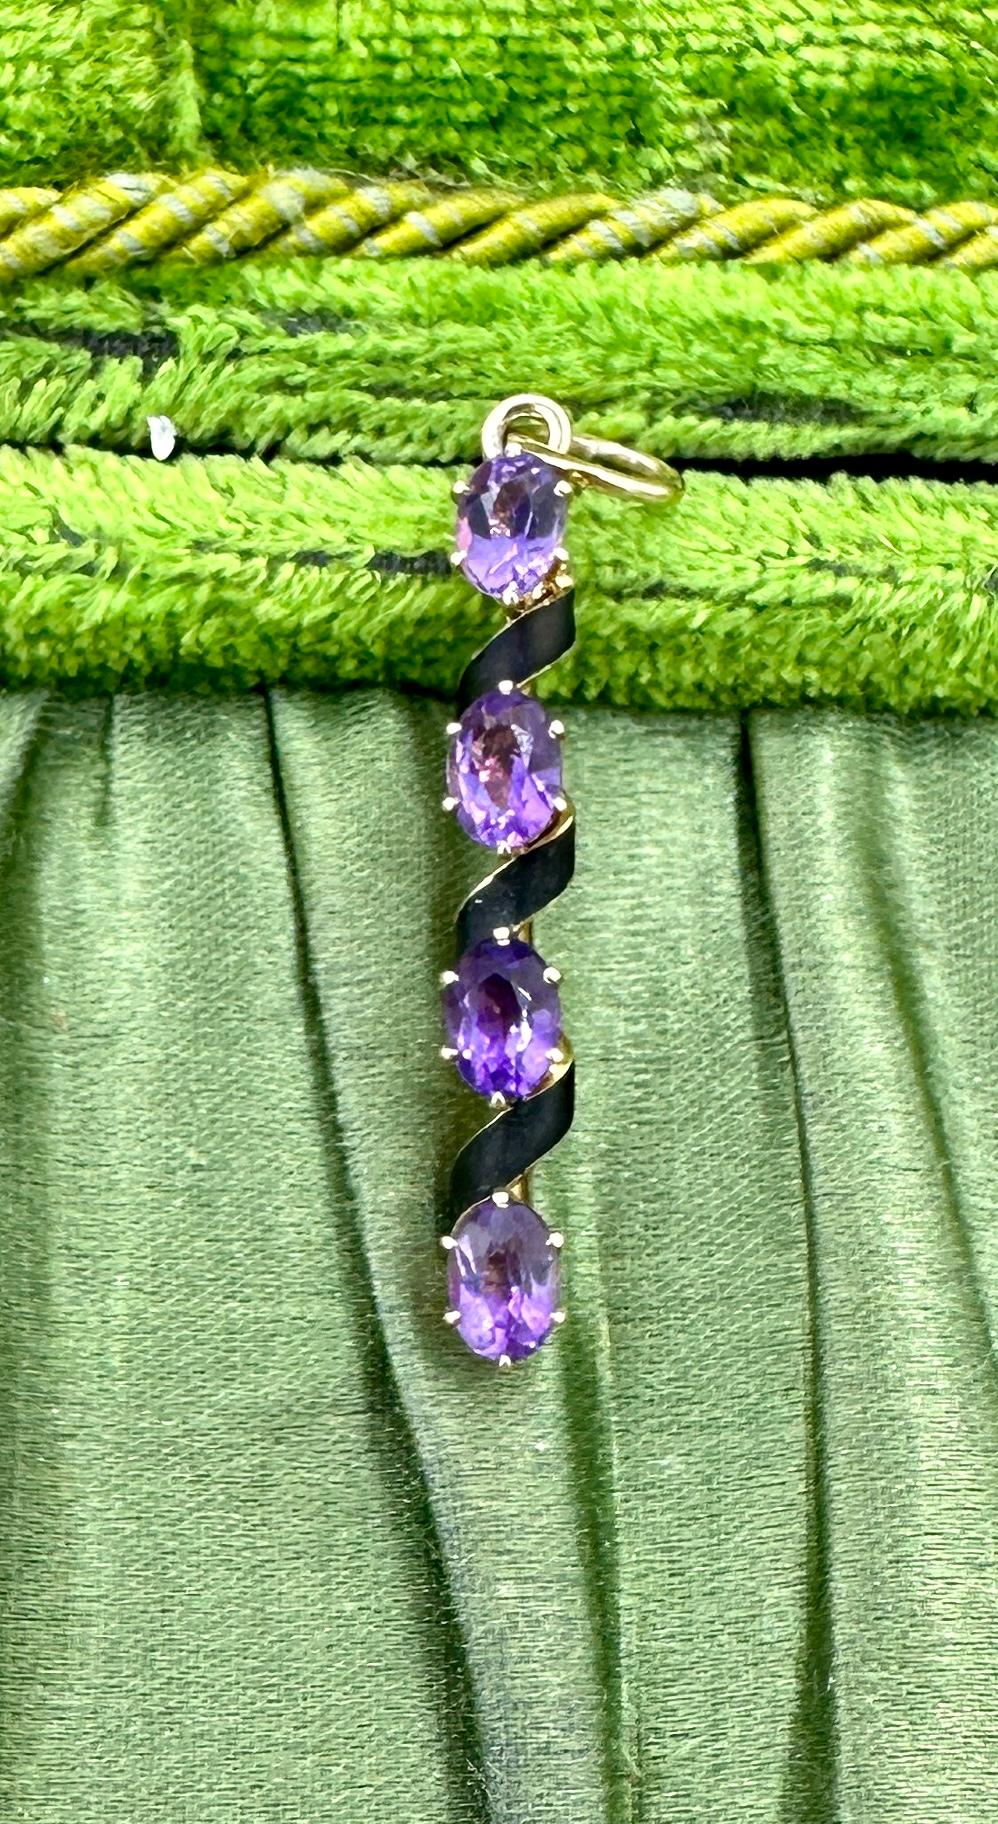 THIS IS A STUNNING ANTIQUE ART DECO - VICTORIAN - EDWARDIAN OVAL FACETED AMETHYST AND BLACK ENAMEL LAVALIERE PENDANT WITH THE MOST GORGEOUS NATURAL OVAL FACETED AMETHYST GEMS IN A TWIST DESIGN WITH BLACK ENAMEL IN 14 KARAT YELLOW GOLD.  THIS IS A